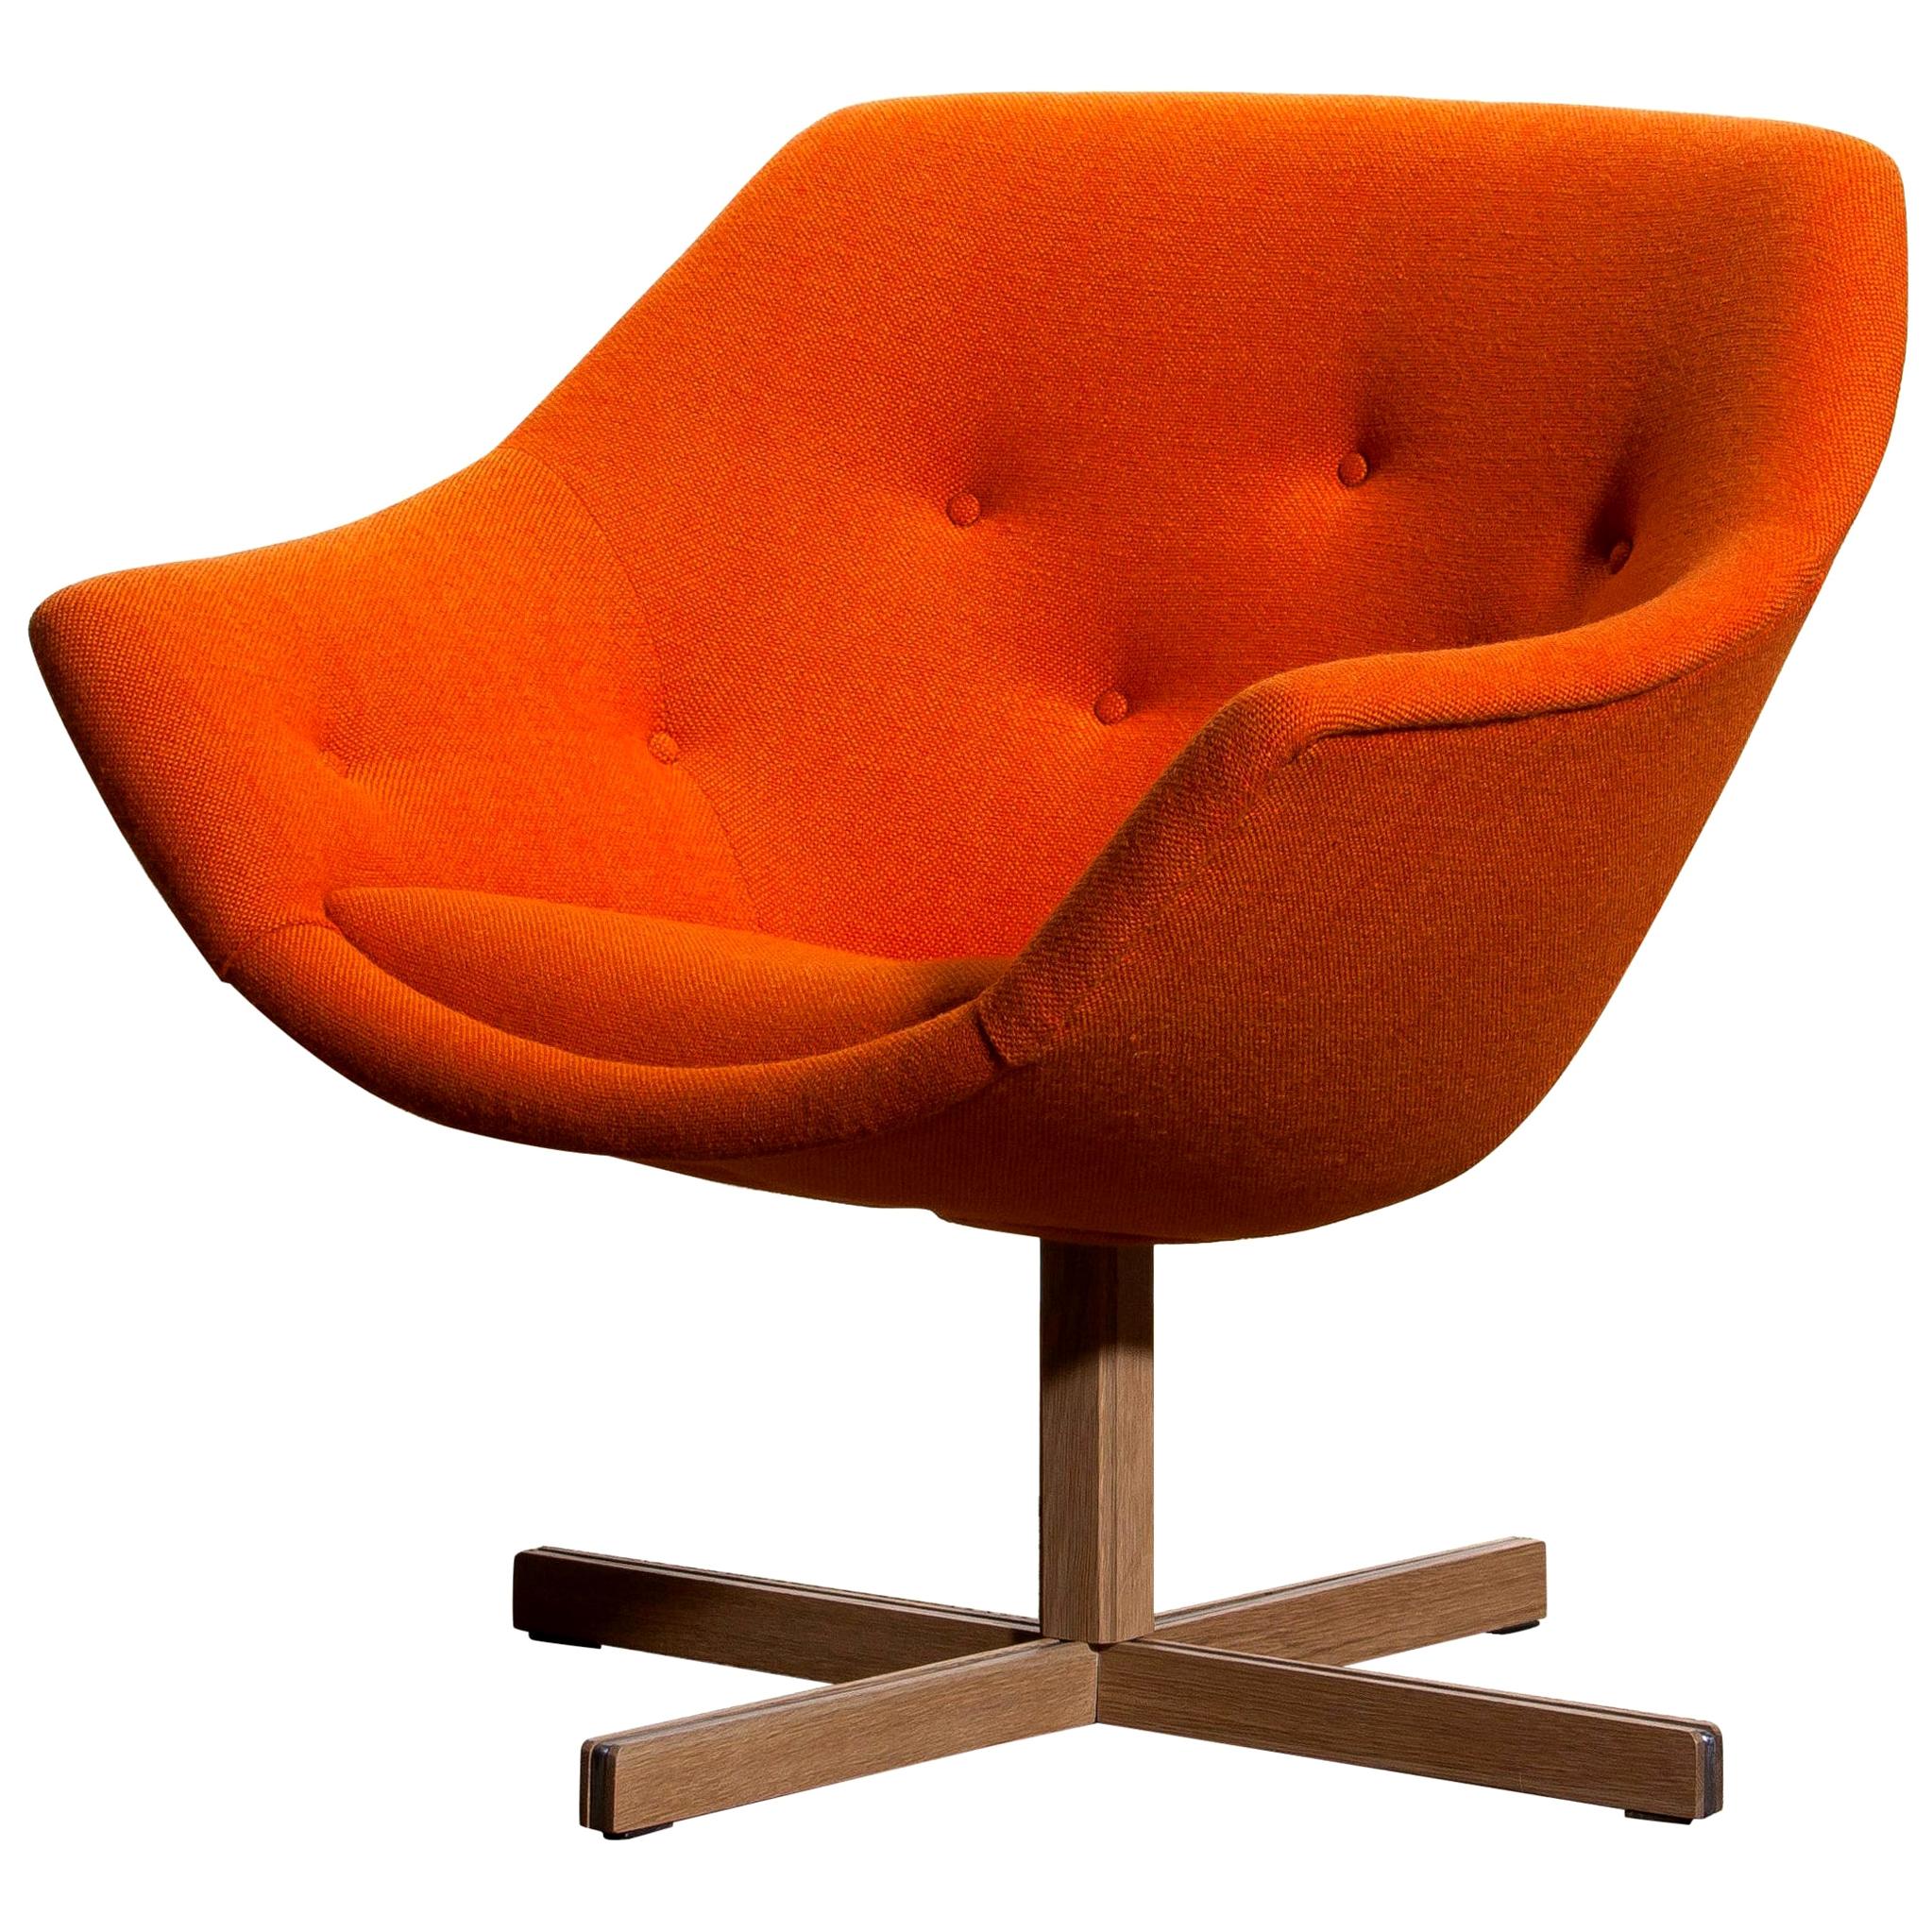 Fantastic 'Mandarini' swivel armchair made by Carl Gustaf Hiort for Puunveisto Oy, wood work Ltd. This chair is upholstered with a buttoned orange fabric 'Hallingdal' by Kvadrat designed by Nanna Ditzel on an oak swivel base.
It is in perfect and